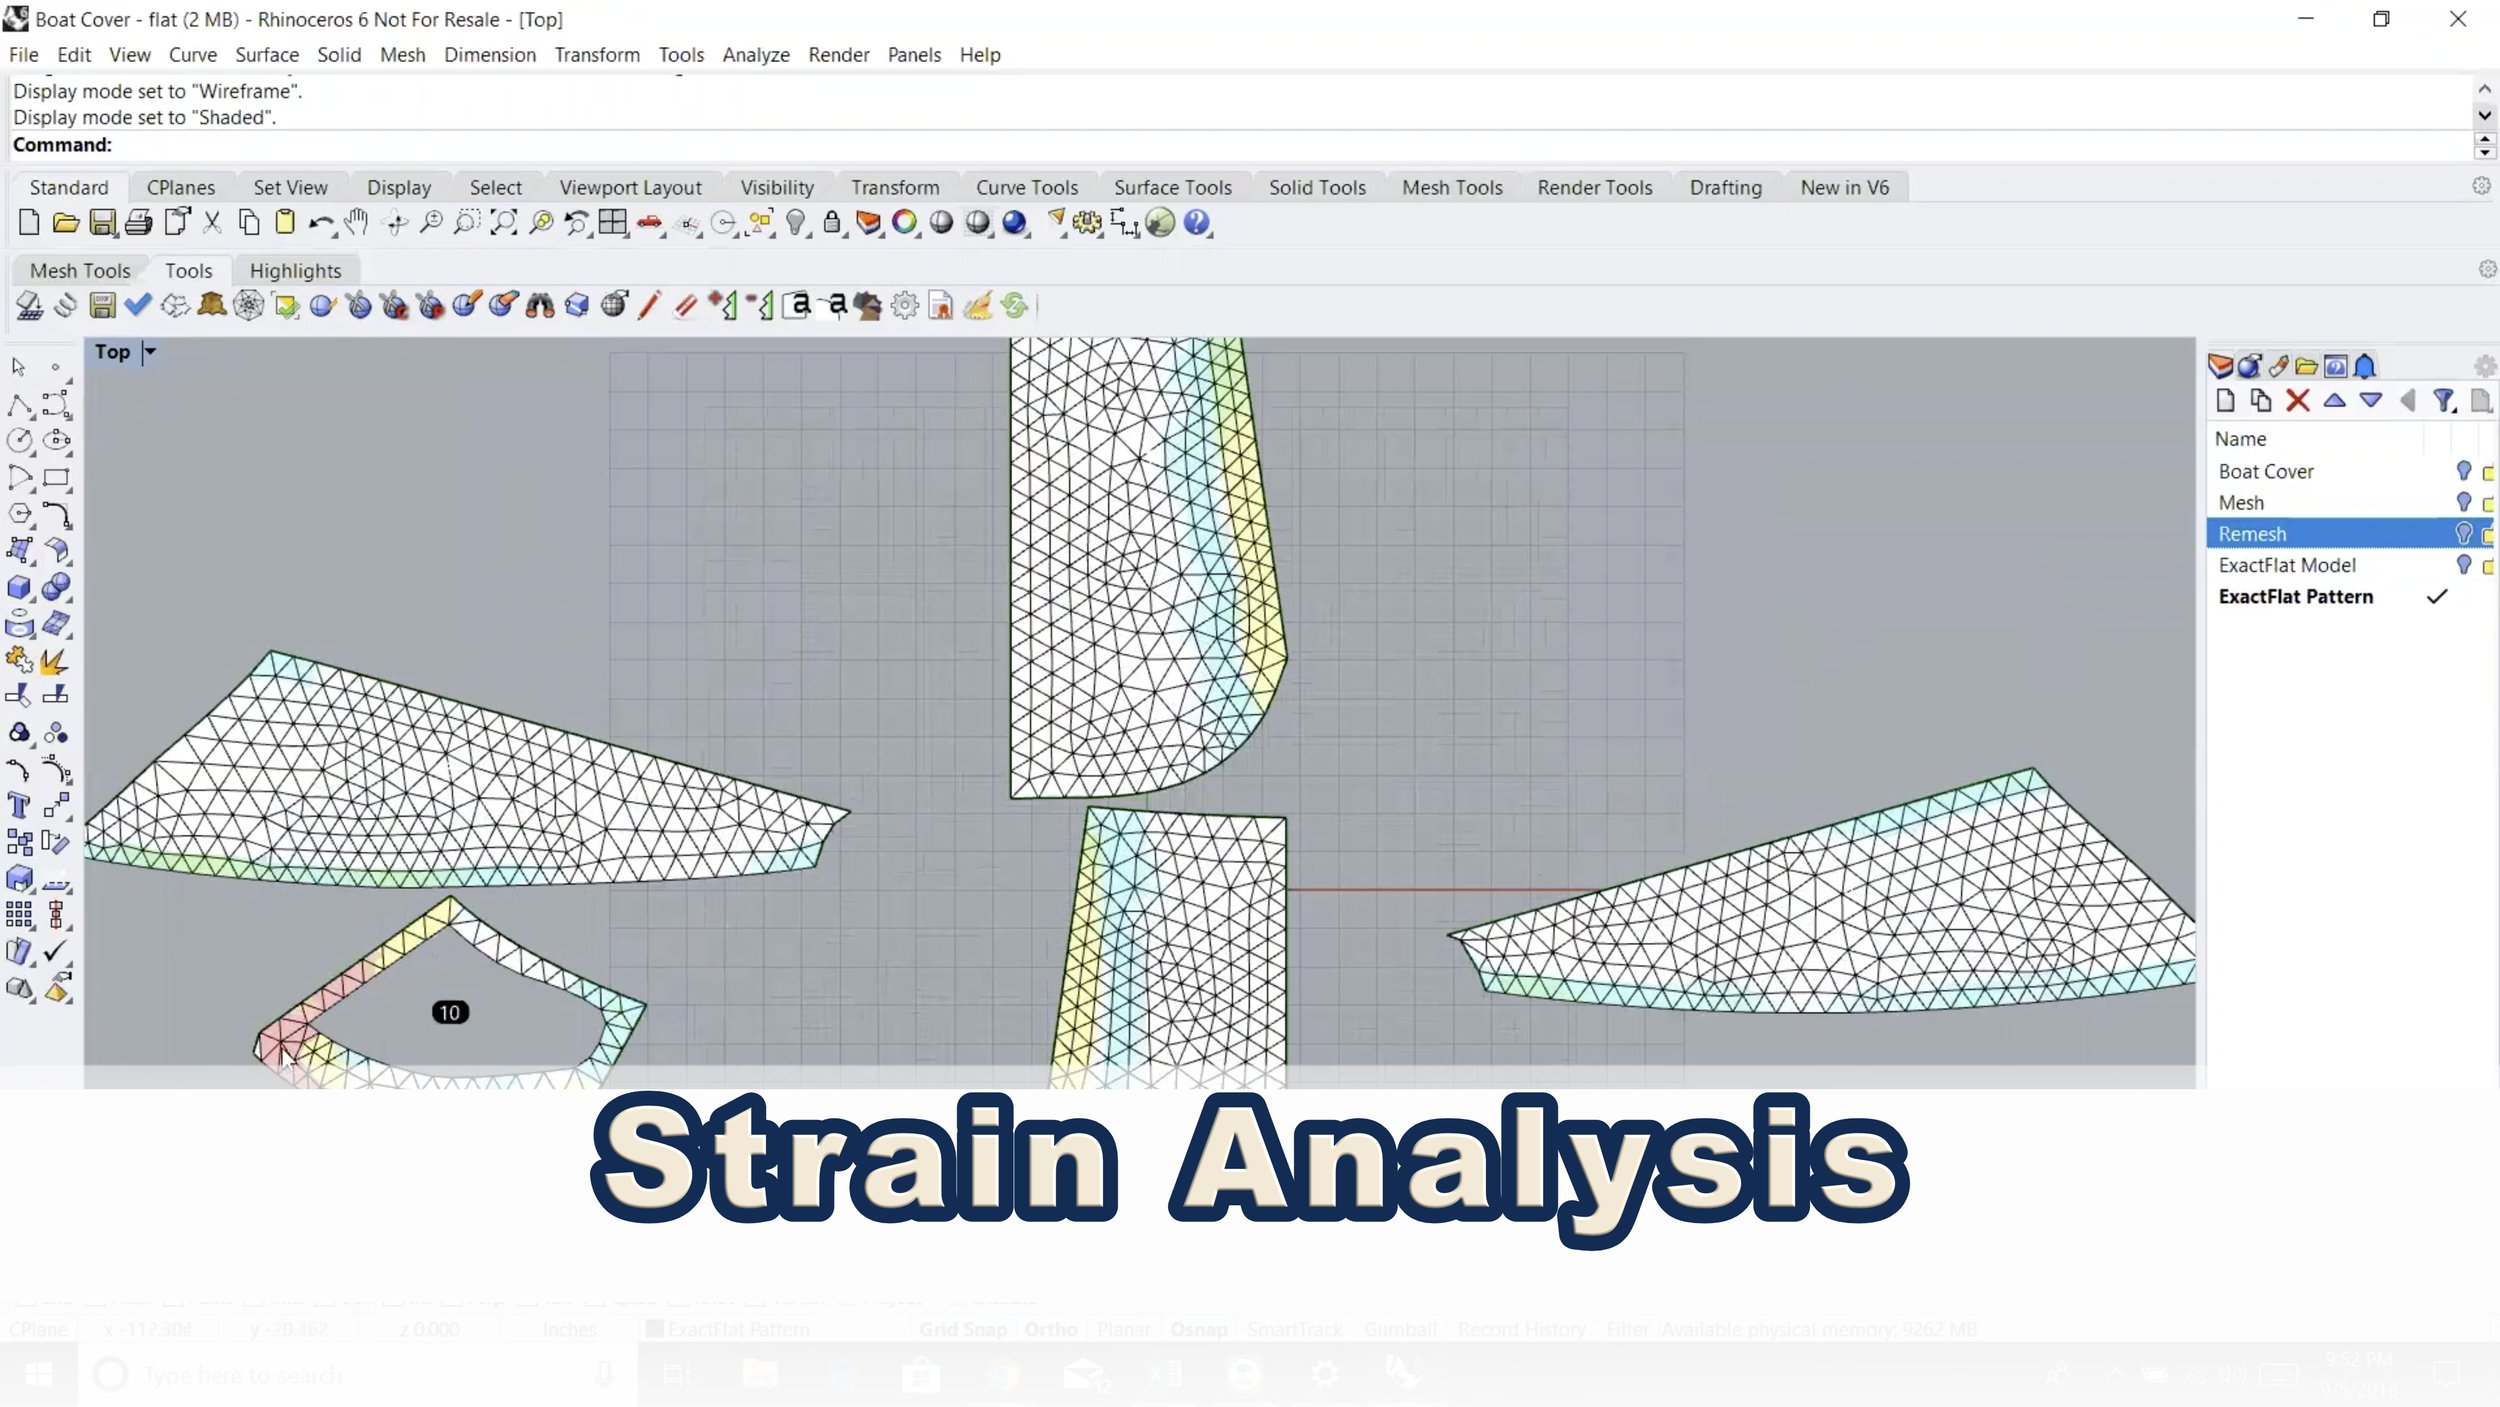 ExactFlat colour coded stress analysis of the 2D pattern